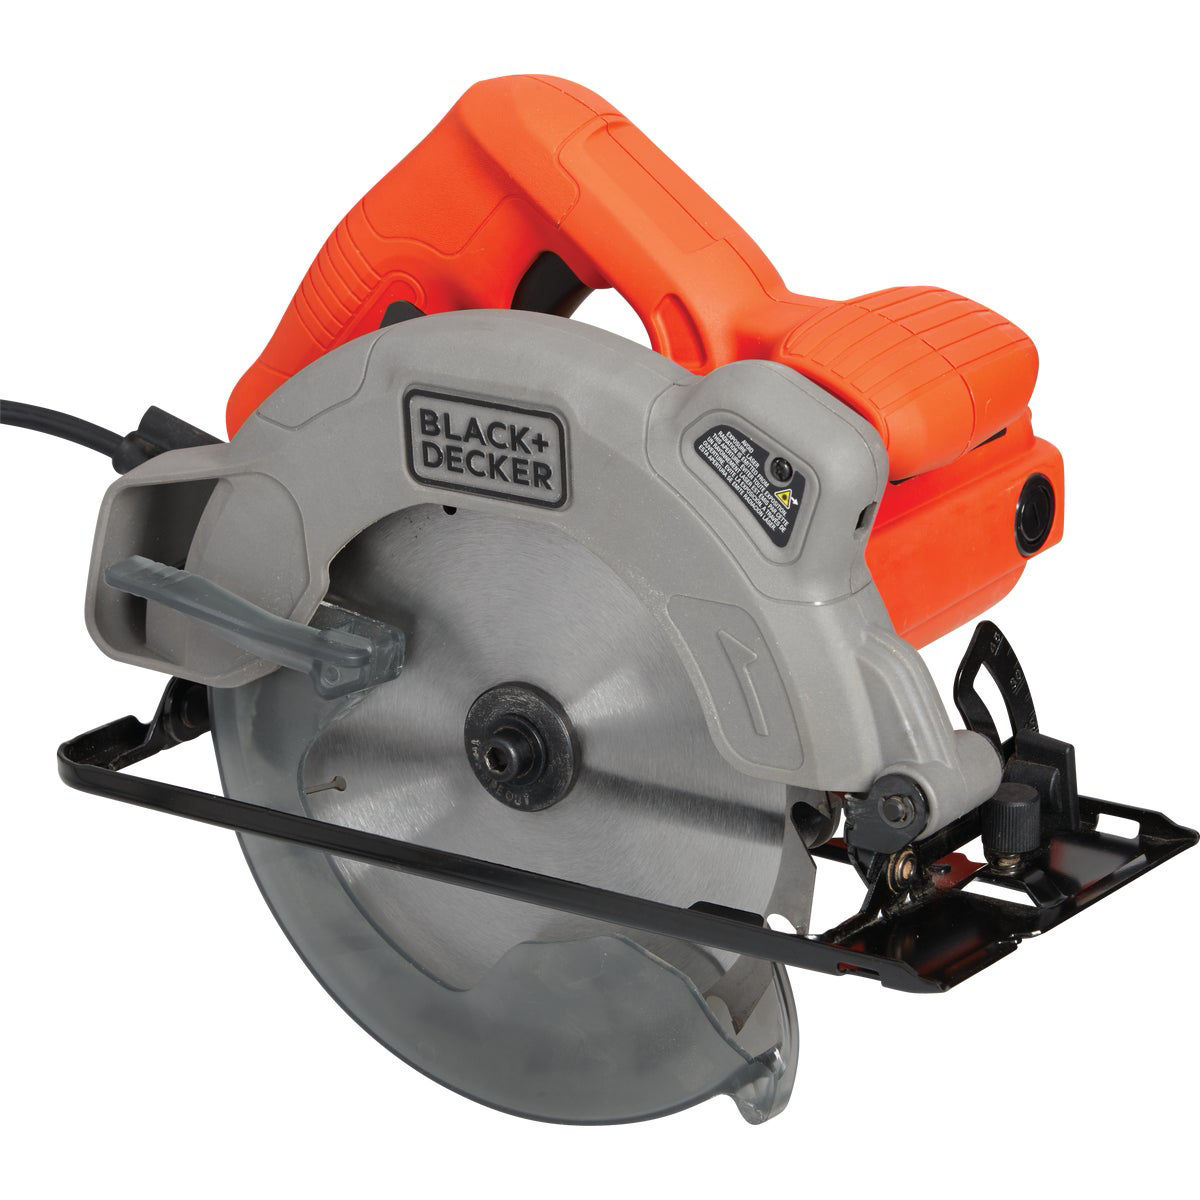 7-1/4-Inch Circular Saw With Laser, 13-Amp